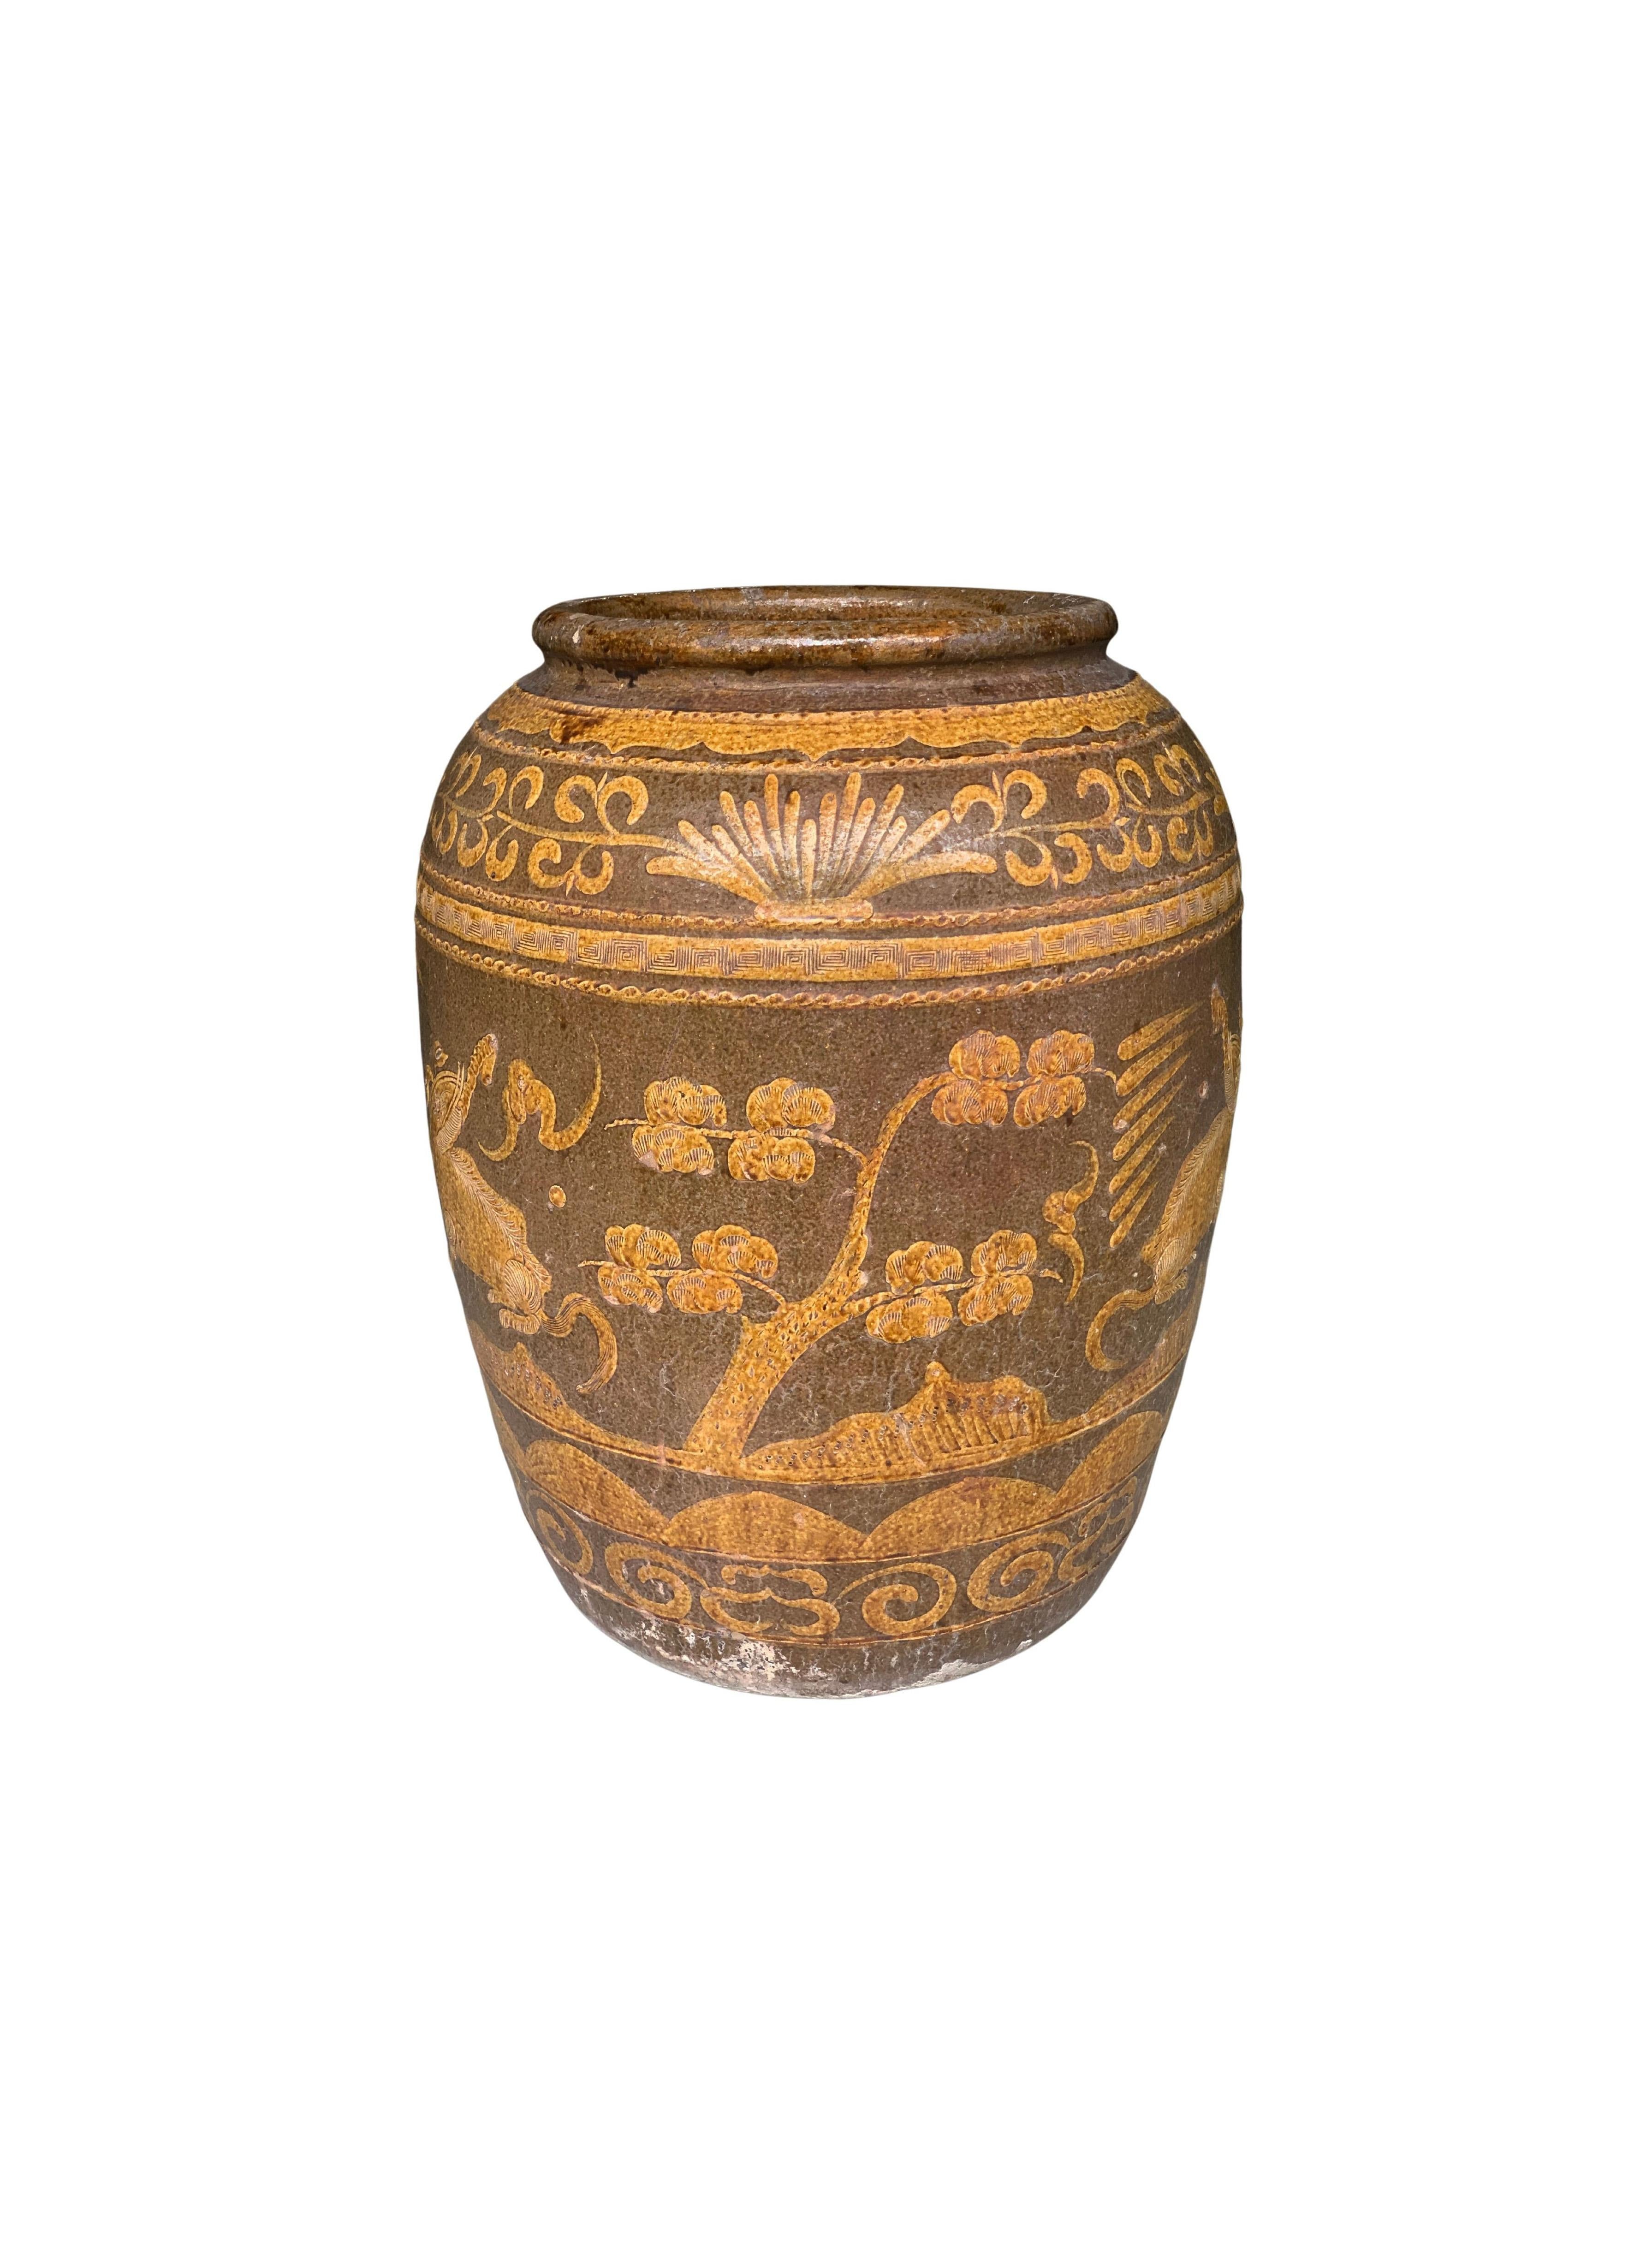 Qing Dynasty Hand-Painted Glazed Pickling Jar, c. 1900 In Good Condition For Sale In Jimbaran, Bali